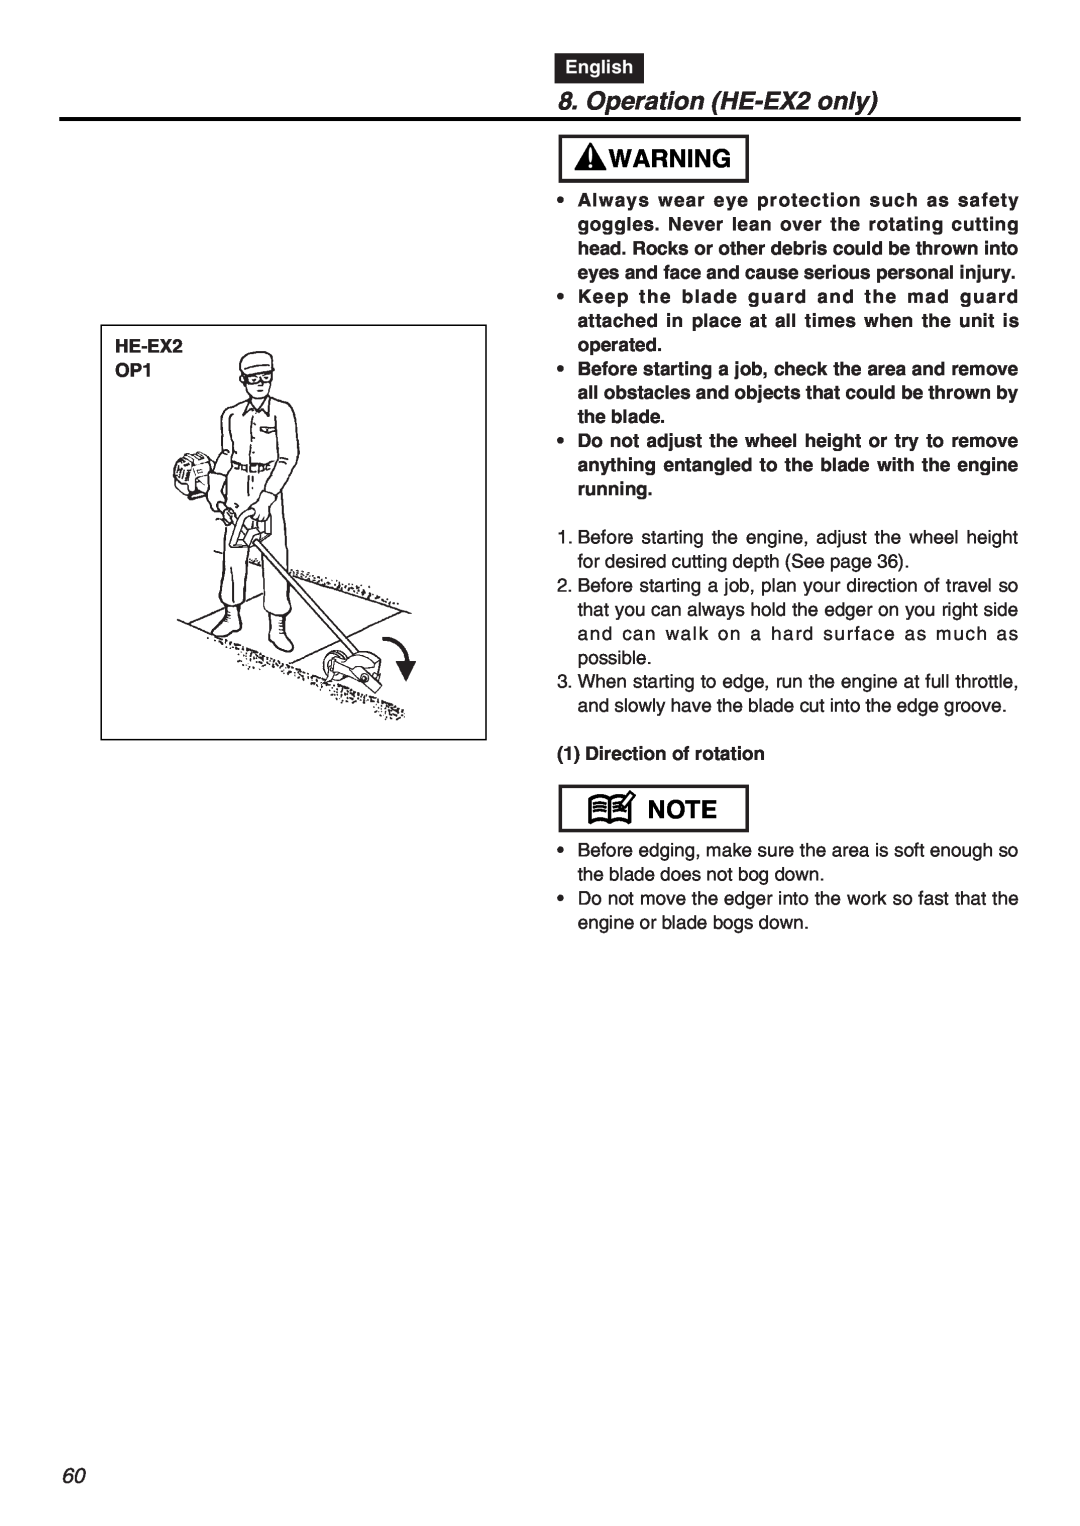 RedMax EXZ2401S-PH-CA manual Operation HE-EX2 only, English 